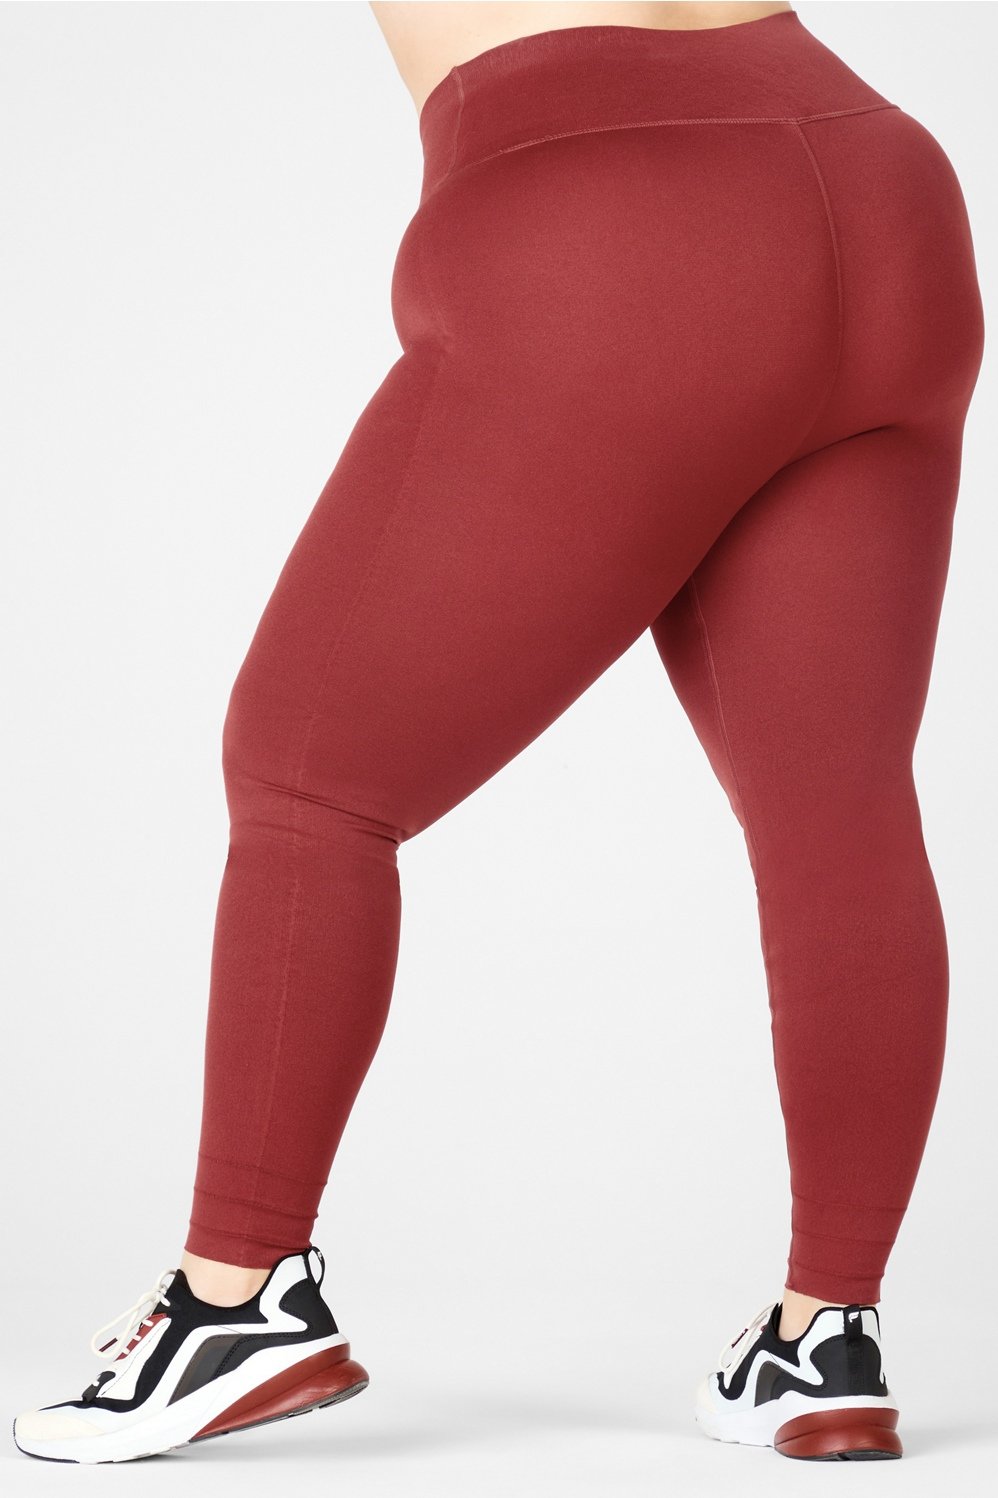 Explore Legging (Red) - New Dimensions Active - All Shapes & Sizes